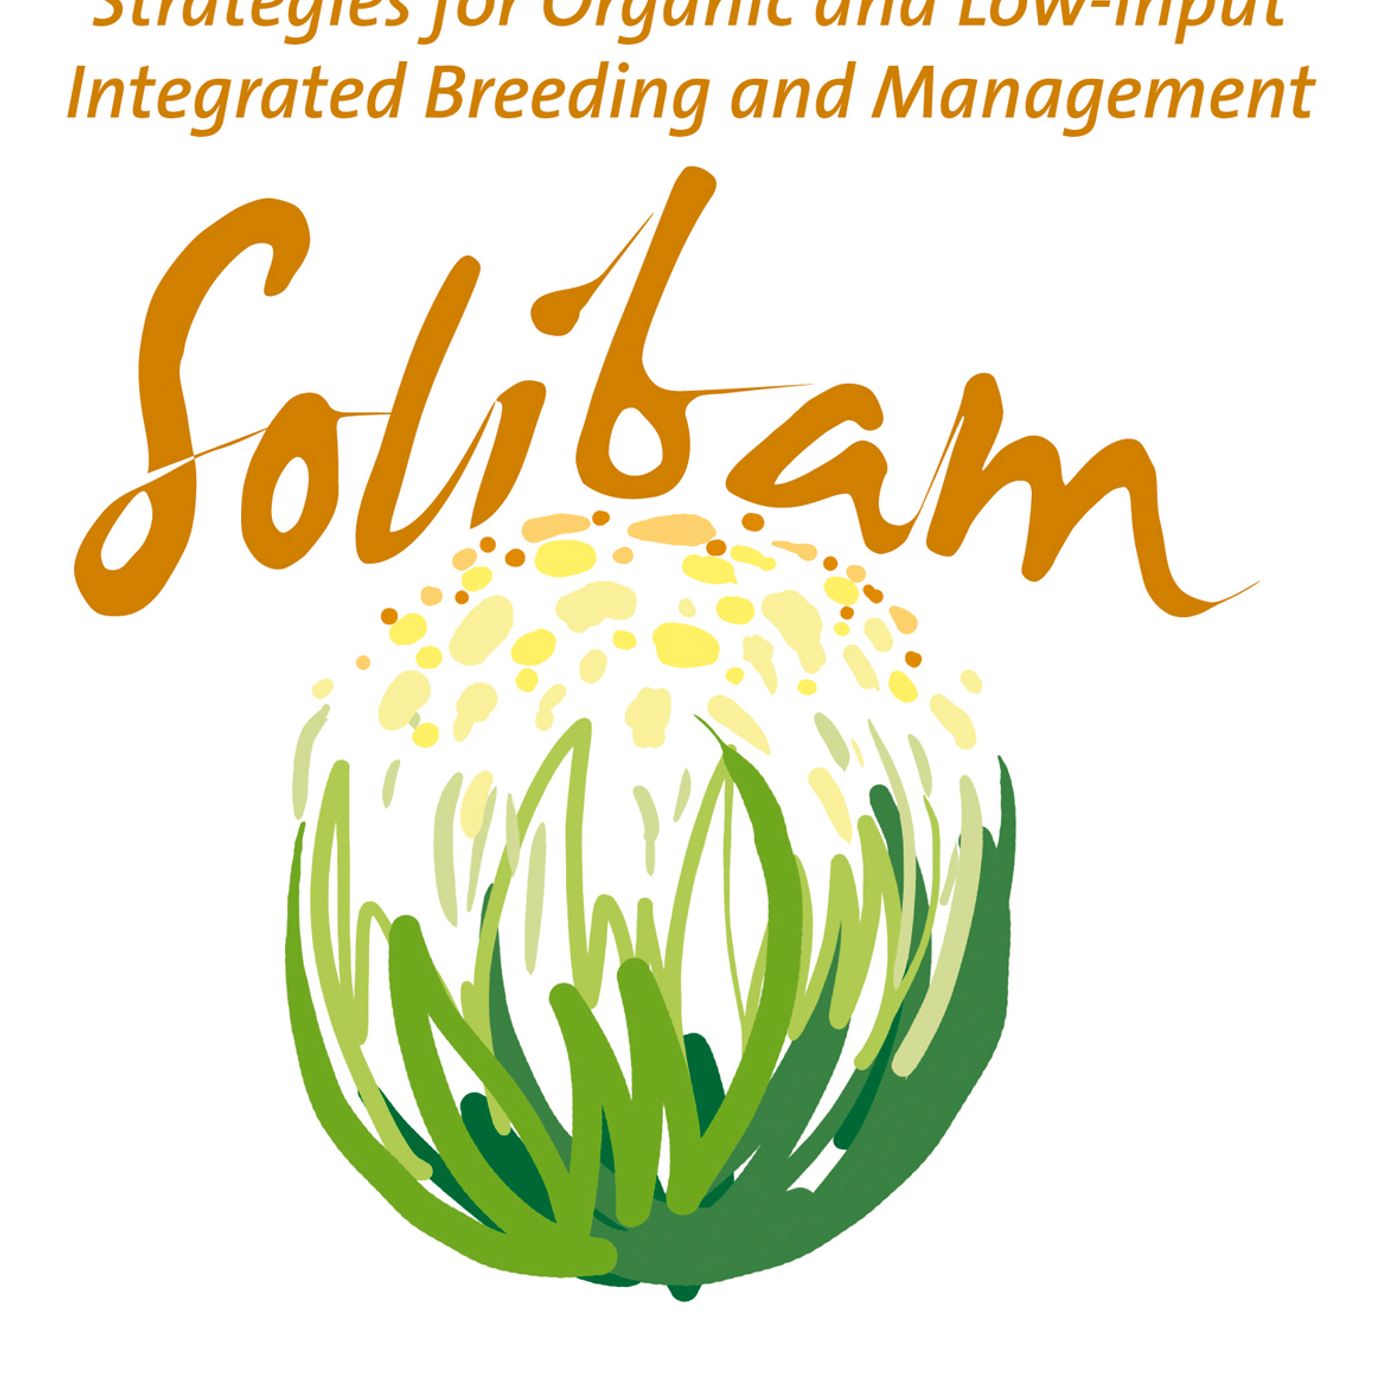 The SOLIBAM project